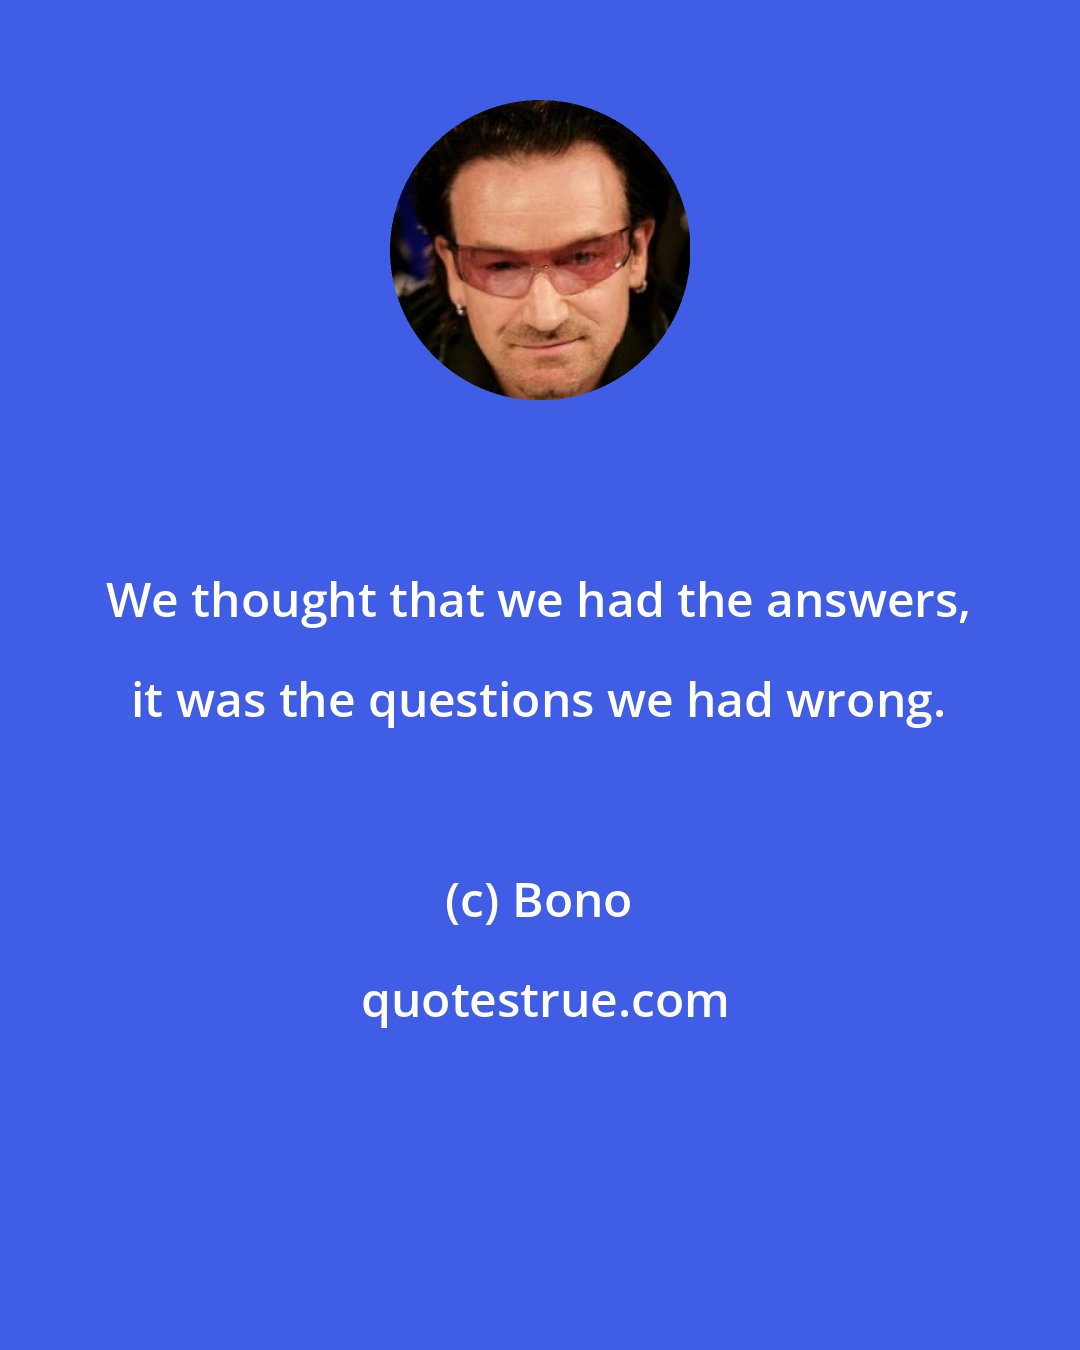 Bono: We thought that we had the answers, it was the questions we had wrong.